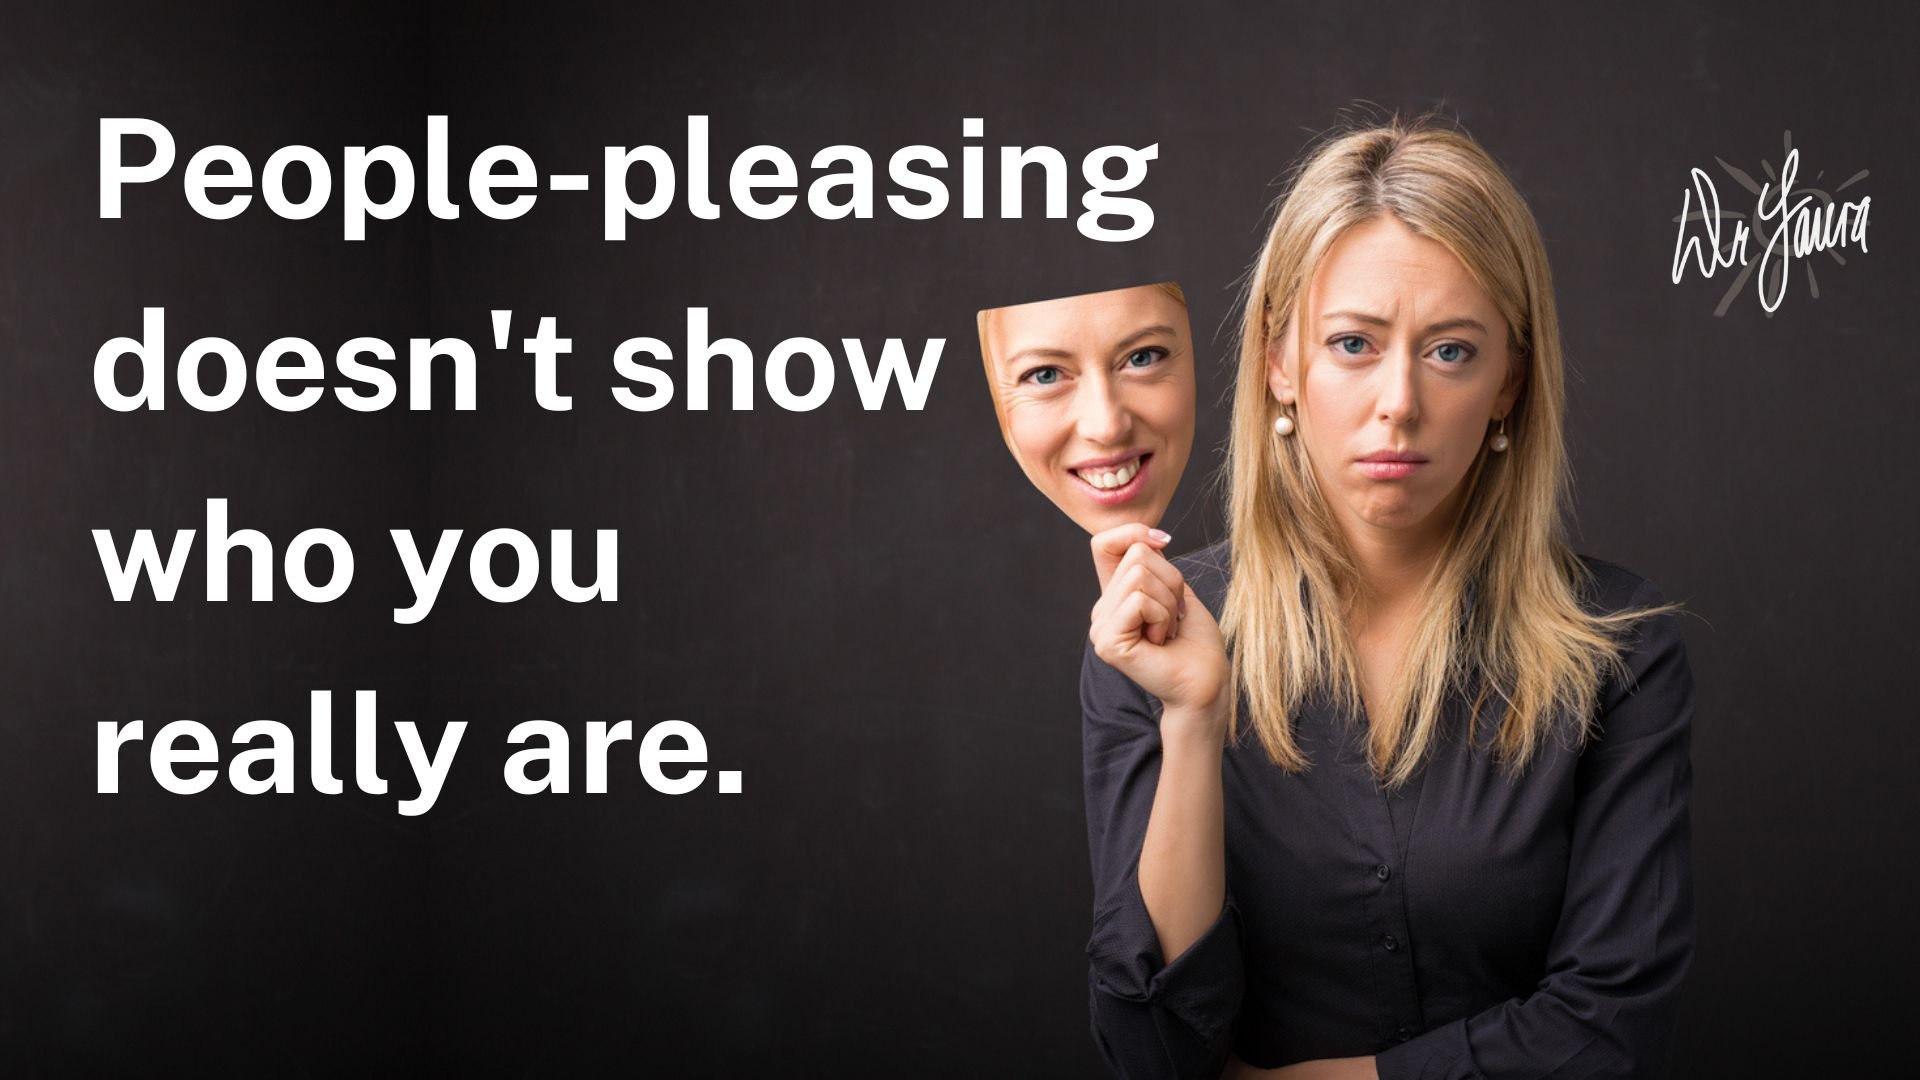 People-pleasing doesn't show who you really are